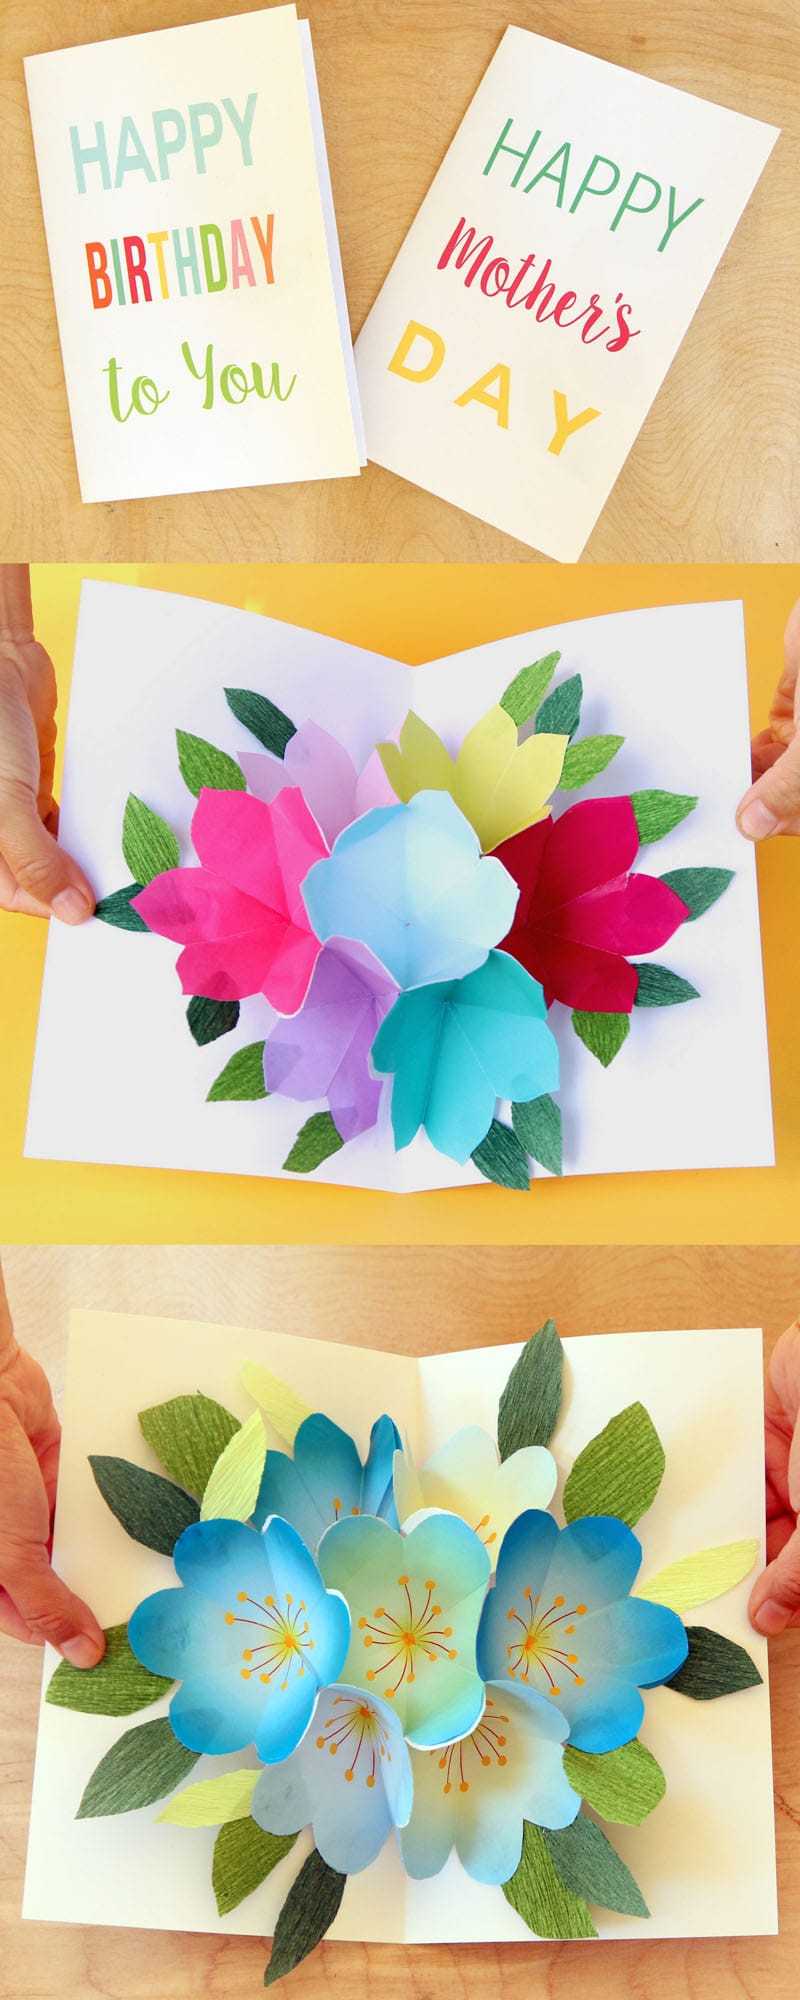 Free Printable Happy Birthday Card With Pop Up Bouquet – A Inside Pop Up Card Templates Free Printable